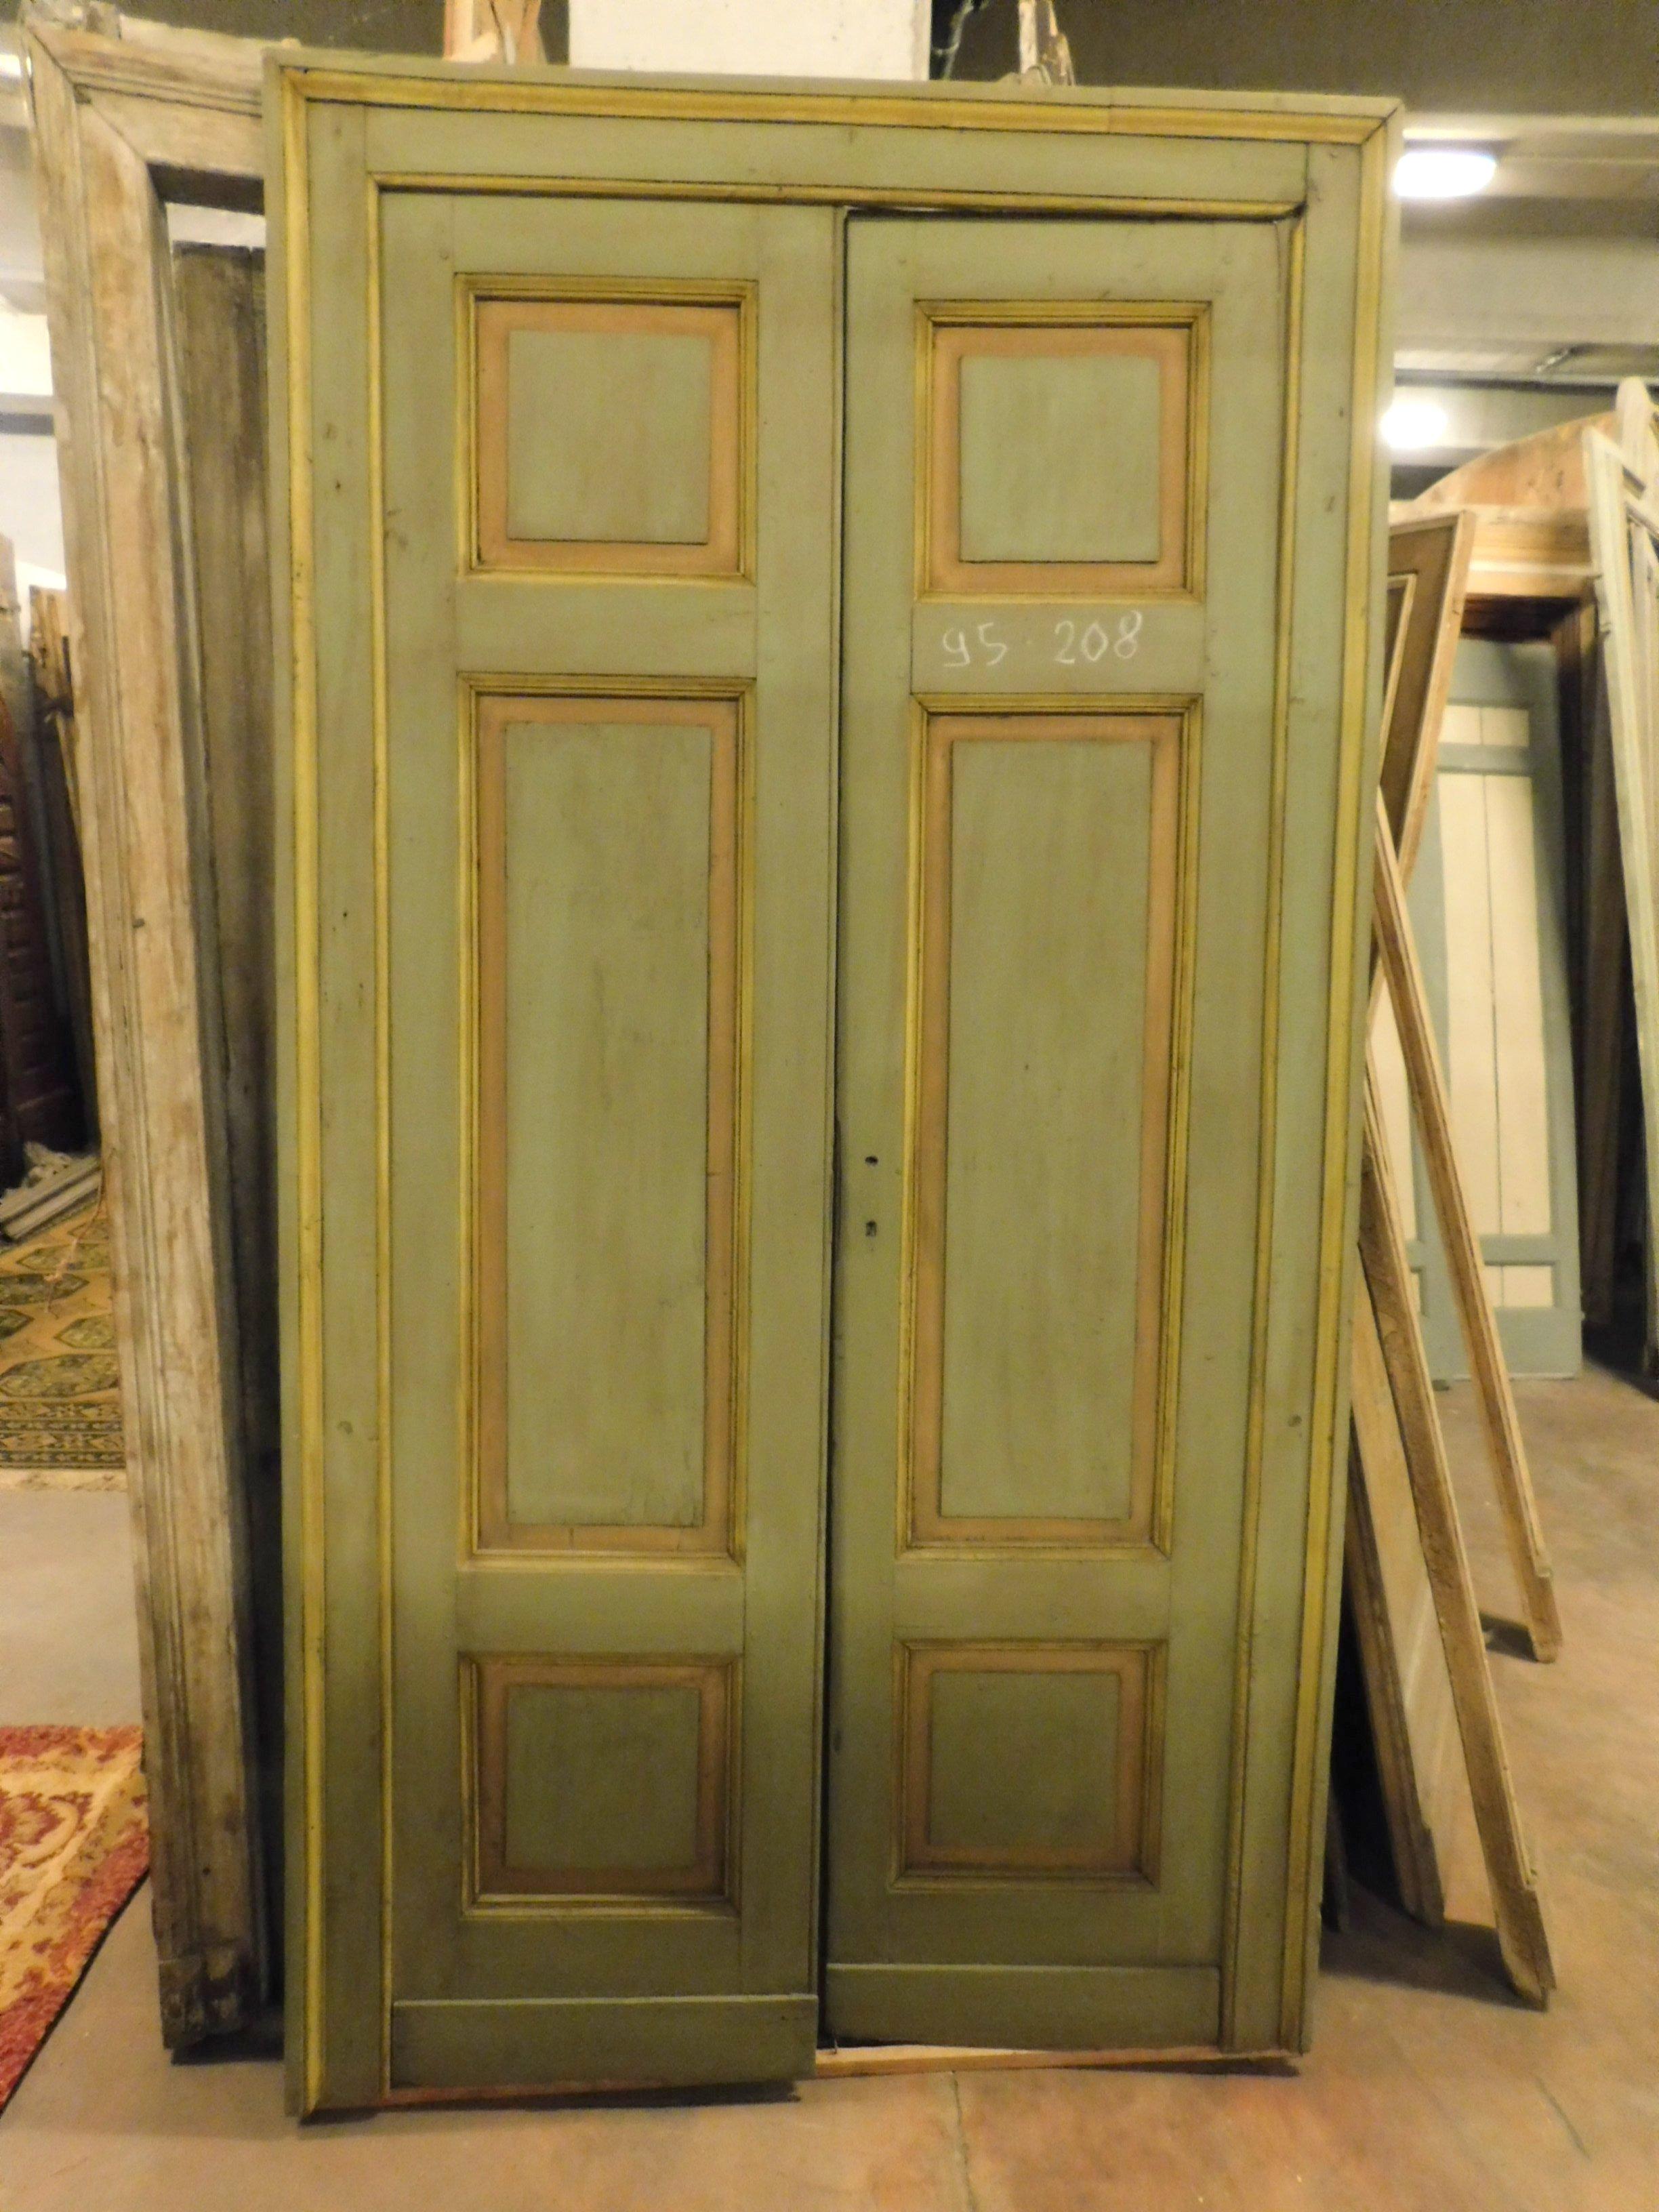 2 antique lacquered doors with frame, also painted on the back, hand-built in poplar, 19th century, from home in Italy, sold in sets of 2, from home in Italy, only the hardware of the handles to be reviewed, total size with frame cm W 118 x H 220 x